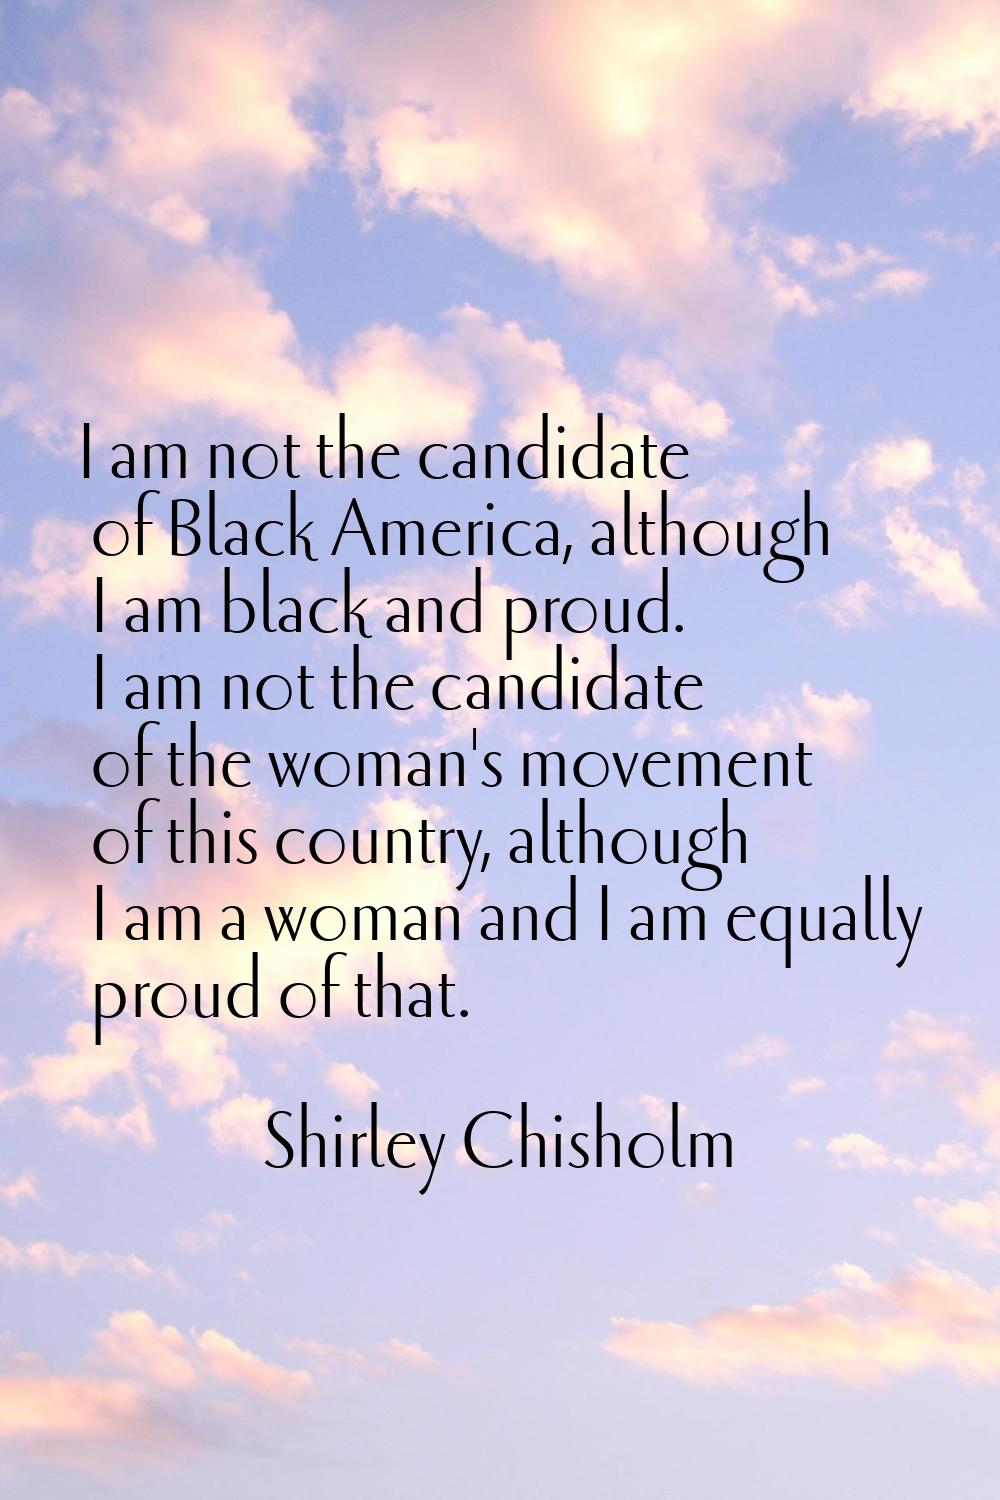 I am not the candidate of Black America, although I am black and proud. I am not the candidate of t